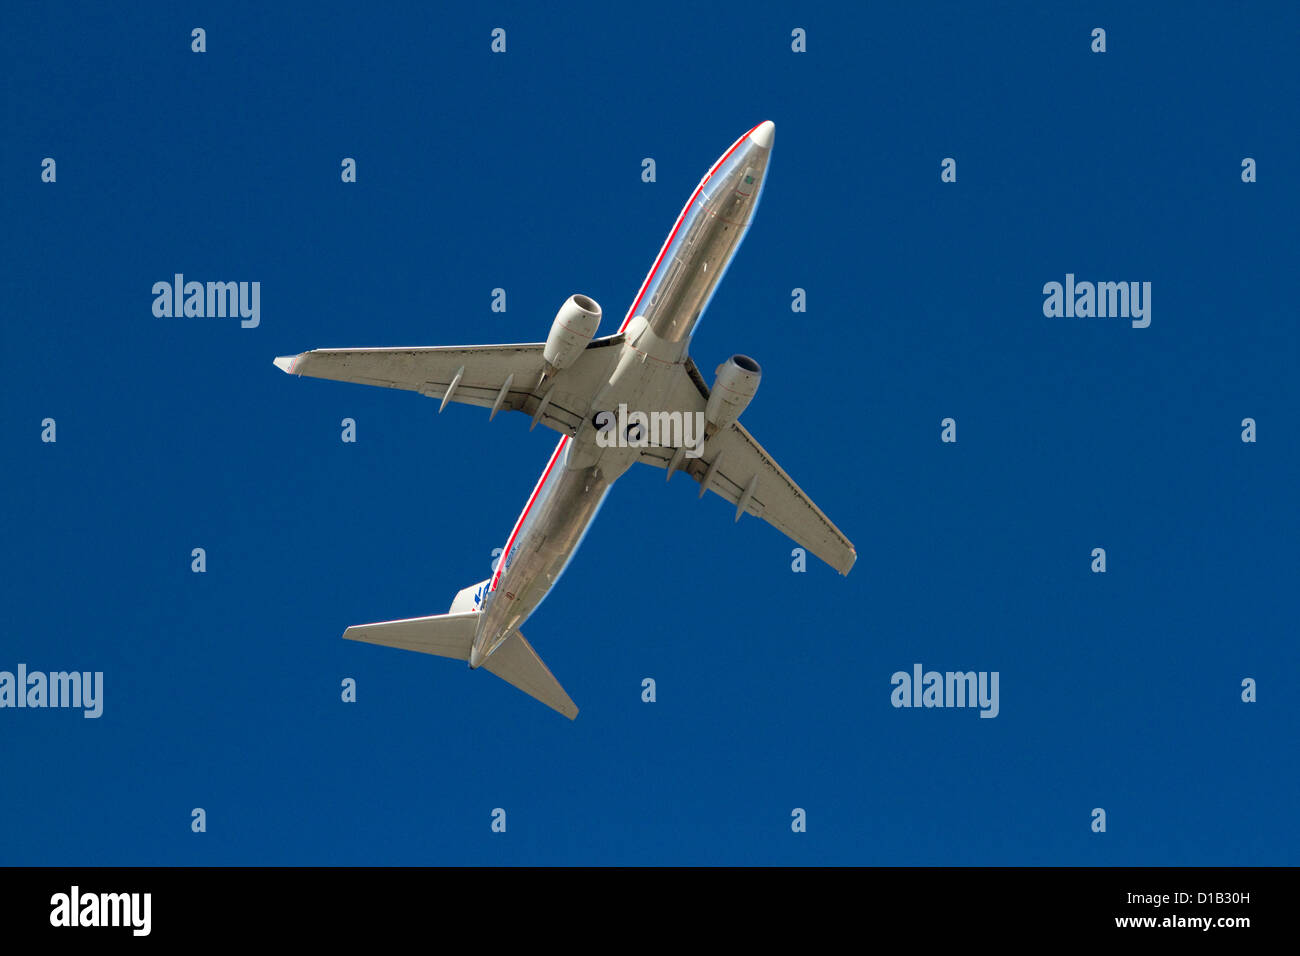 Boeing 737 at take off from the Miami International Airport, Florida, USA. Stock Photo